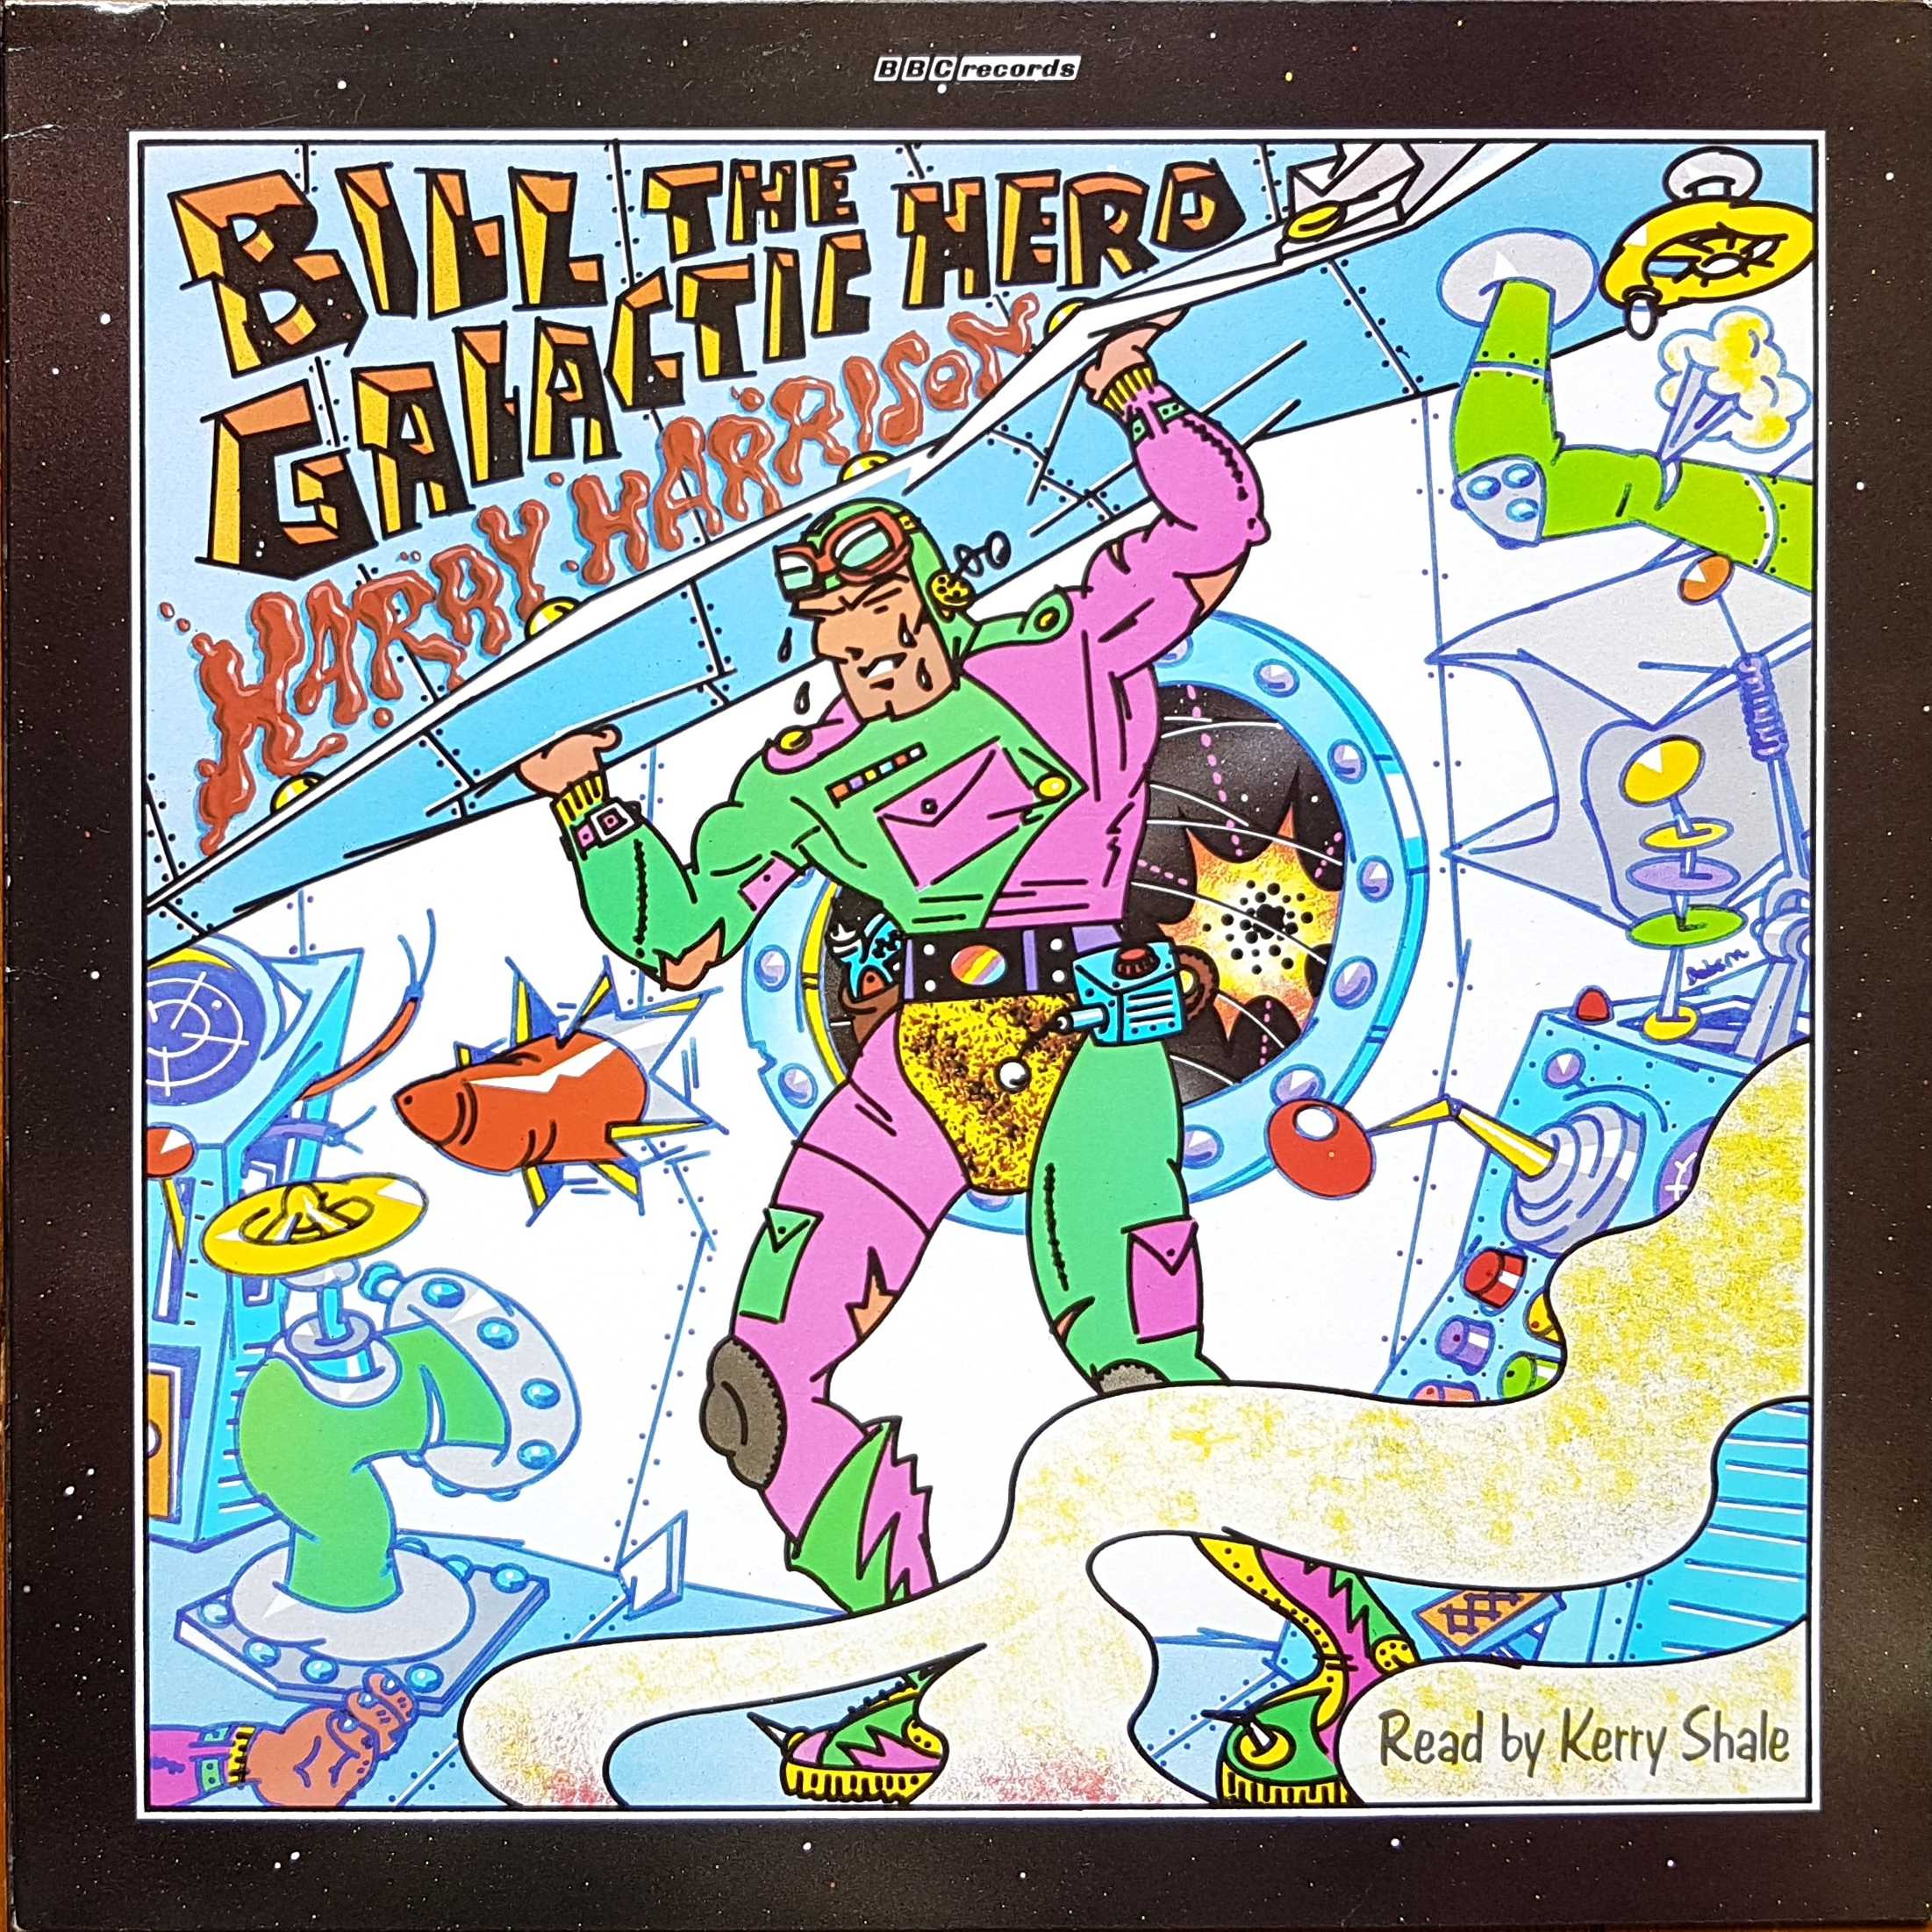 Picture of REC 532 Bill the galactic hero by artist Kerry Shale from the BBC albums - Records and Tapes library